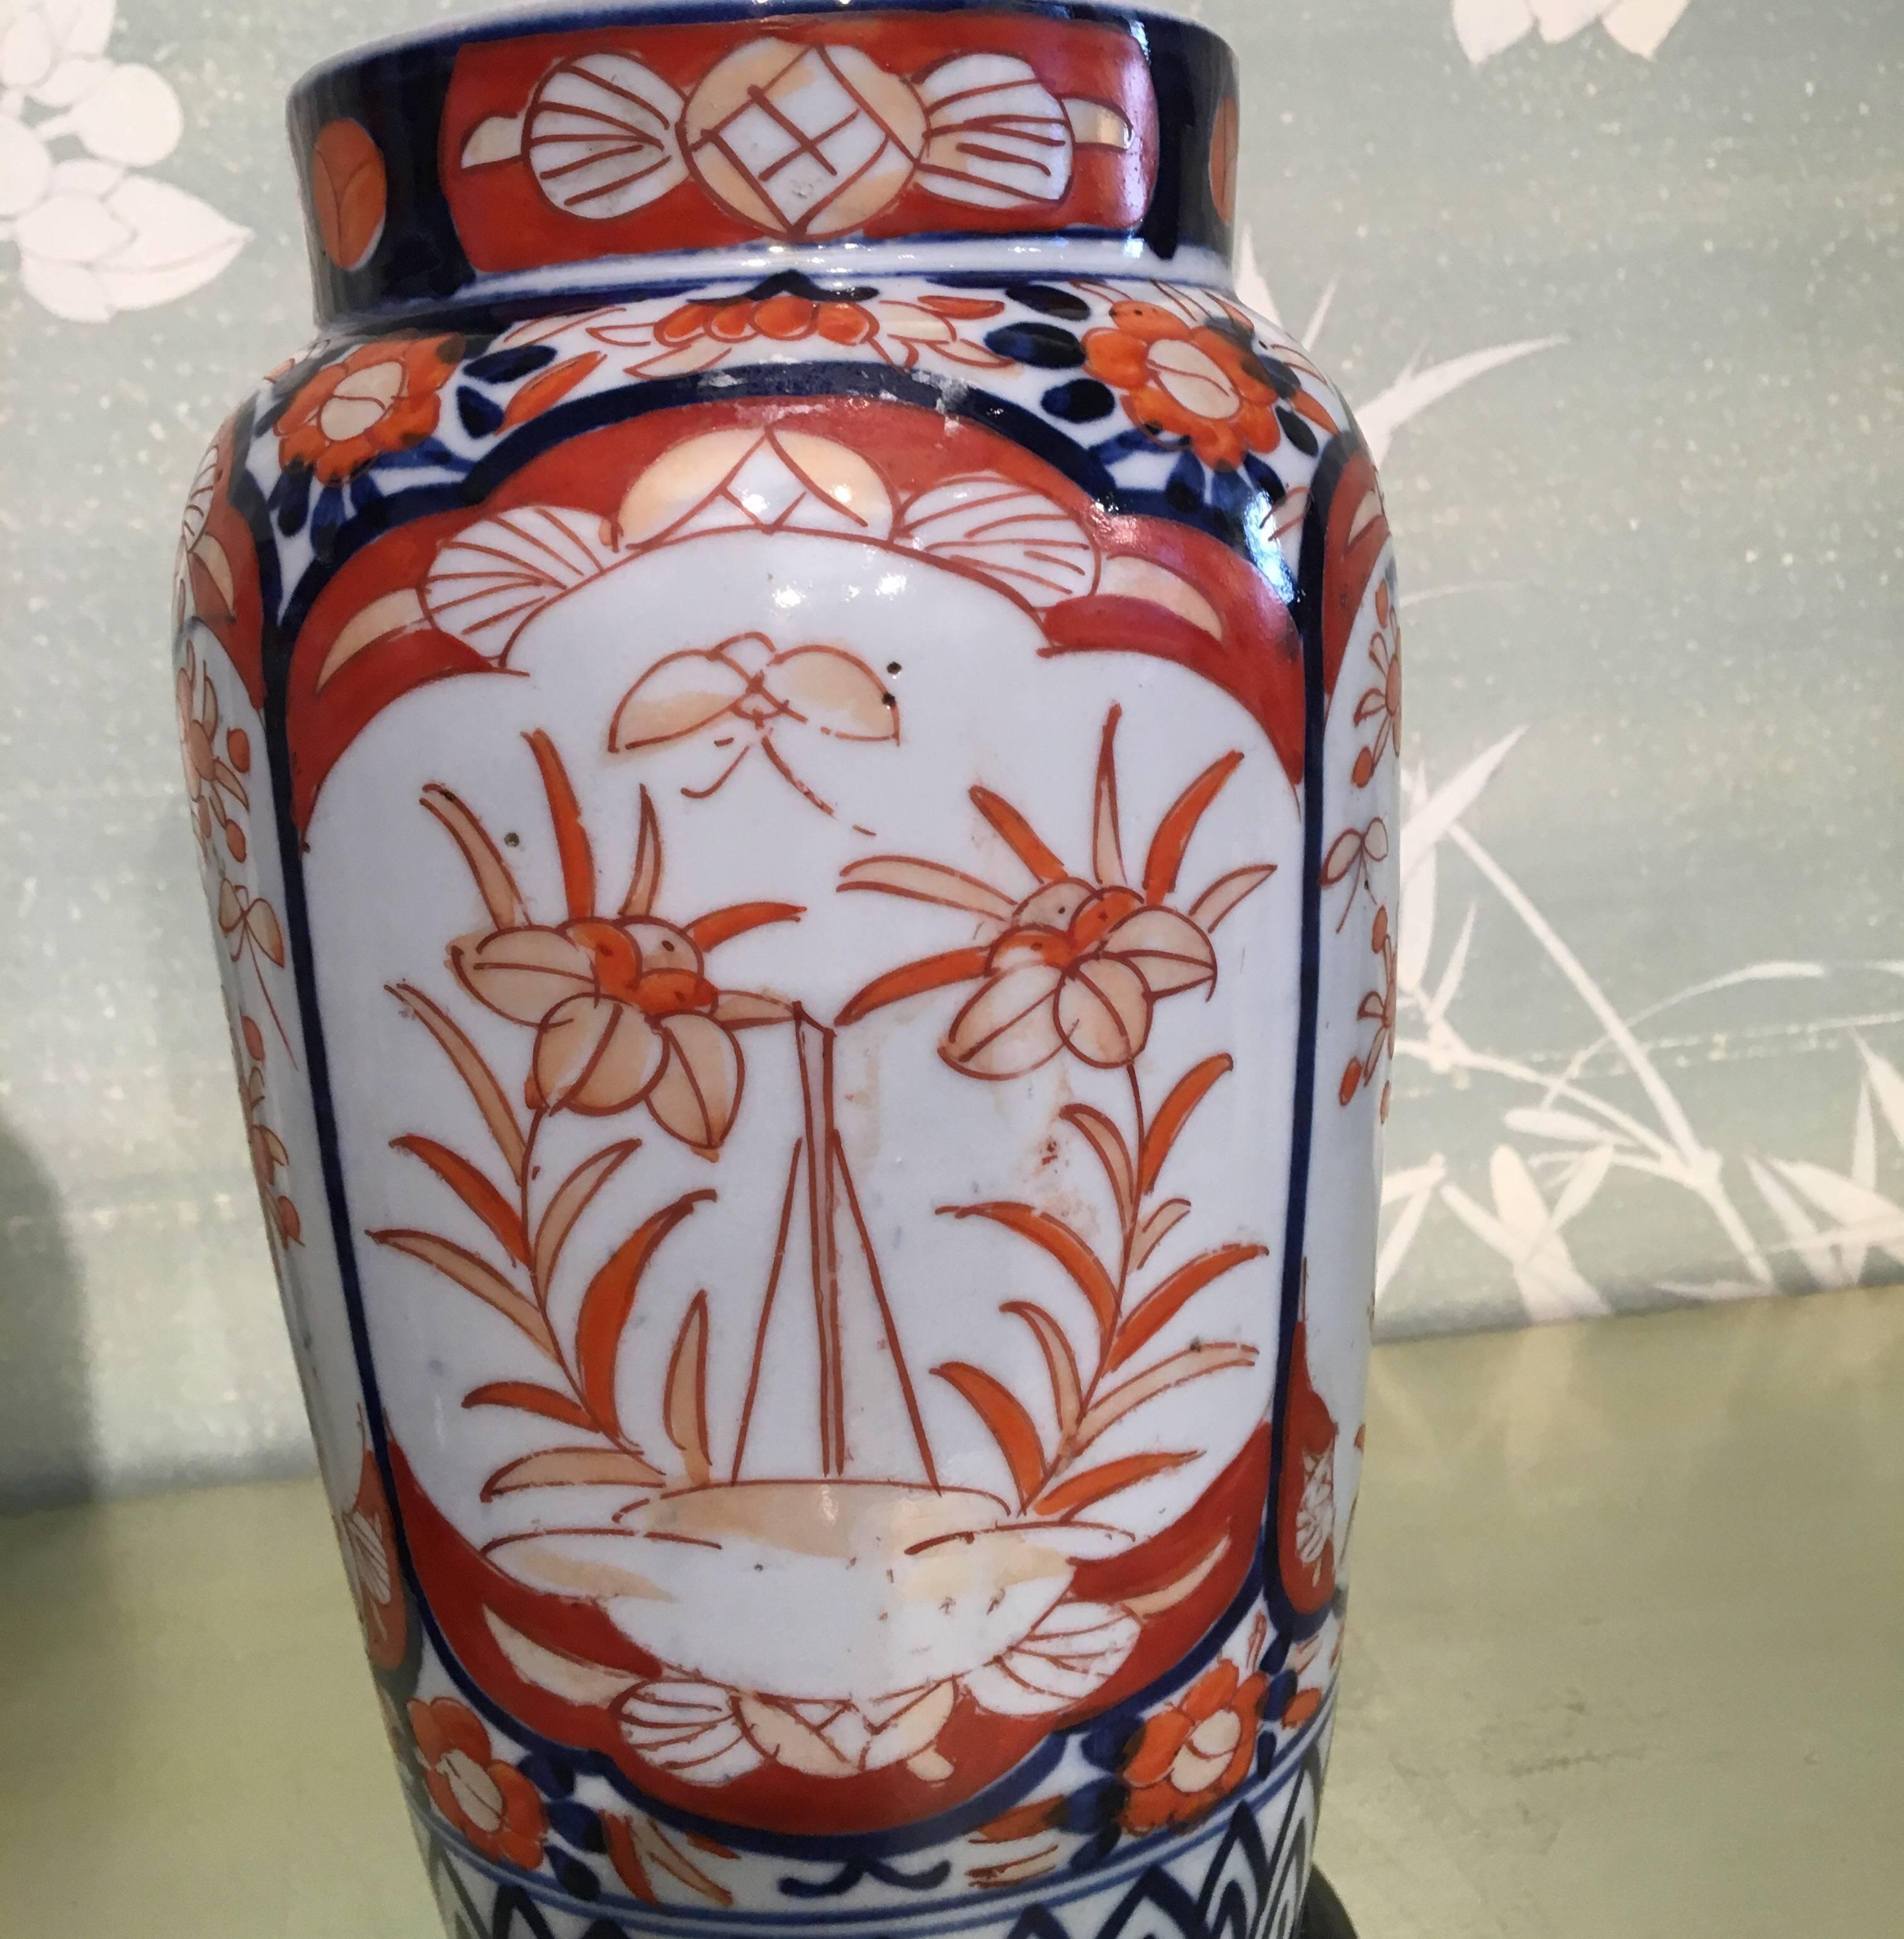 A pair of late 19th century Japanese Imari vases on stands, with design of flowering trees in reserves.